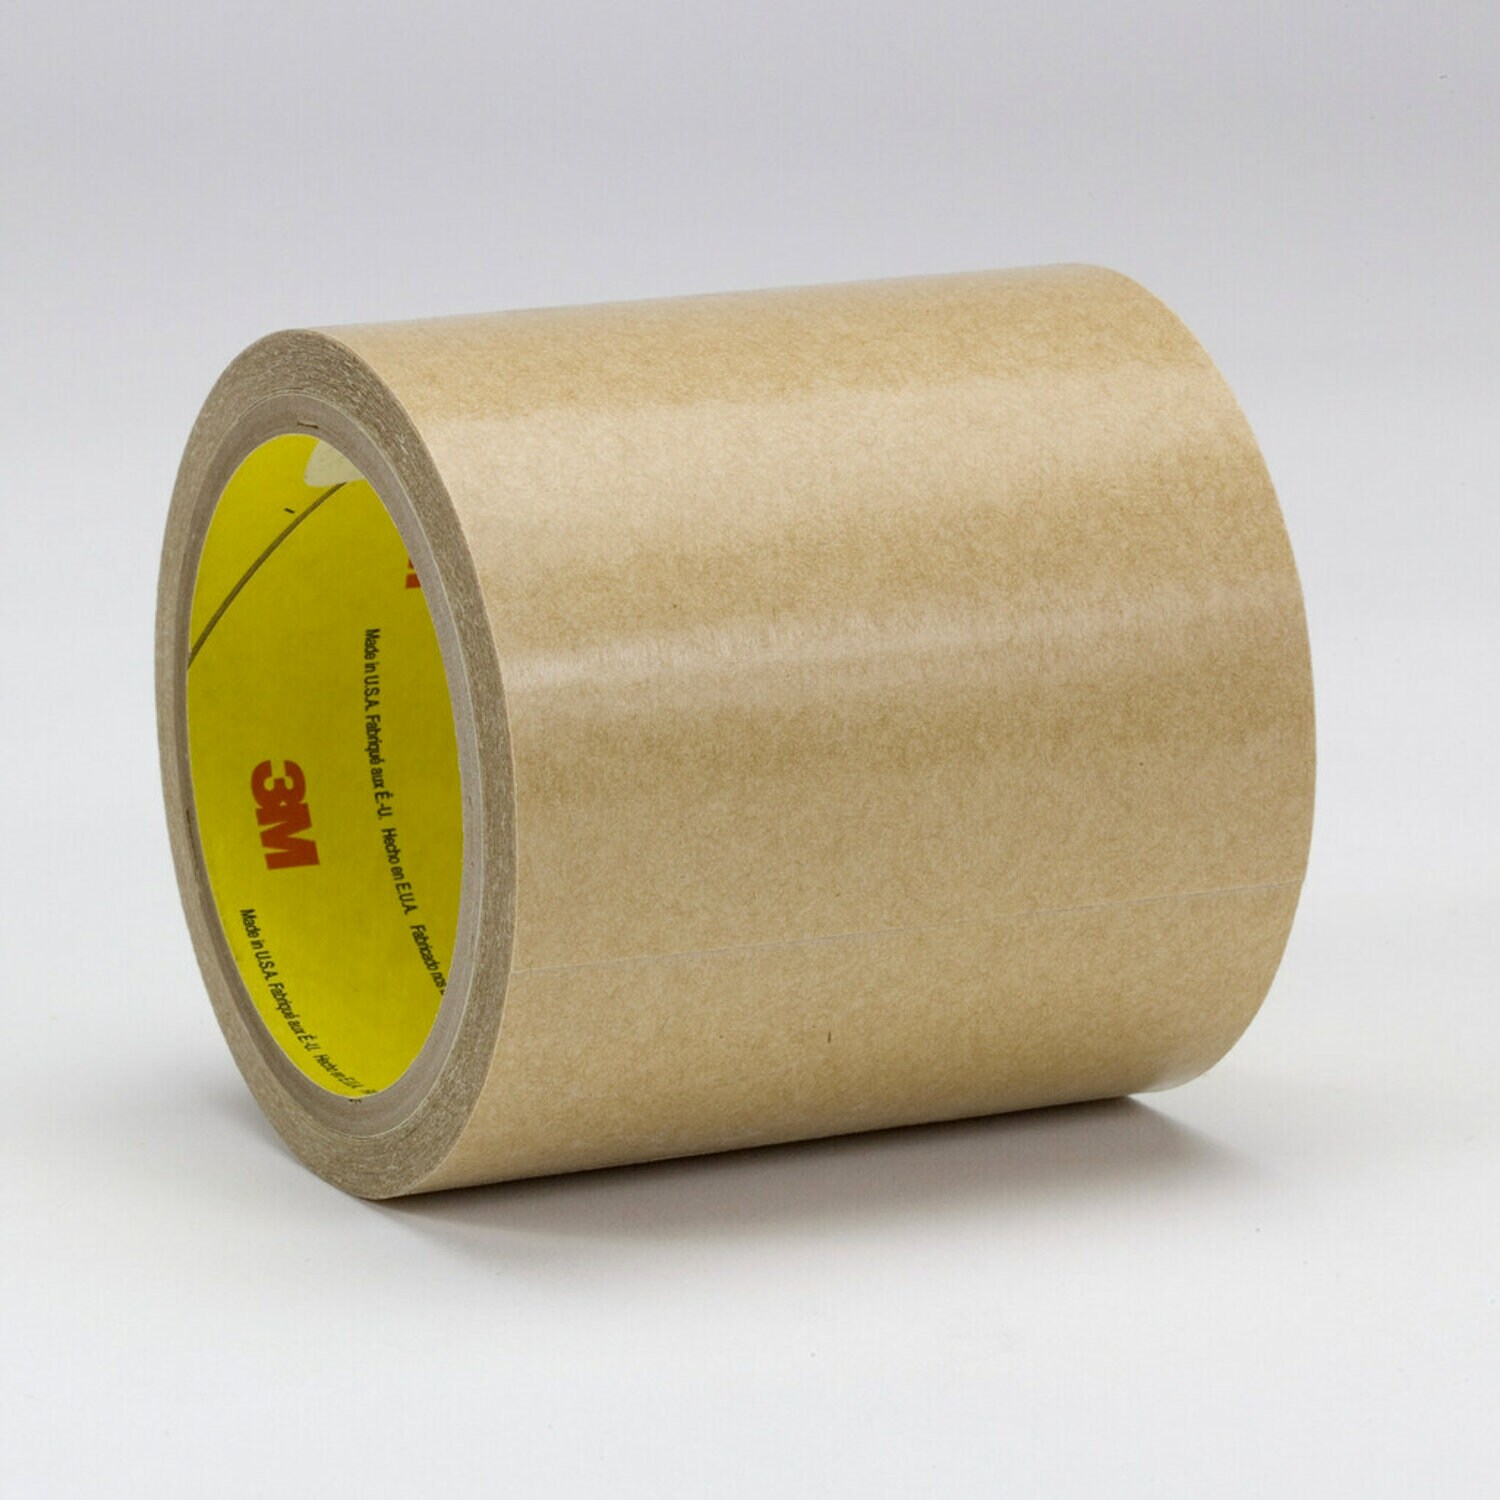 7010312074 - 3M Adhesive Transfer Tape 927, Clear, 2 in x 60 yd, 2 Mil, 24/Case